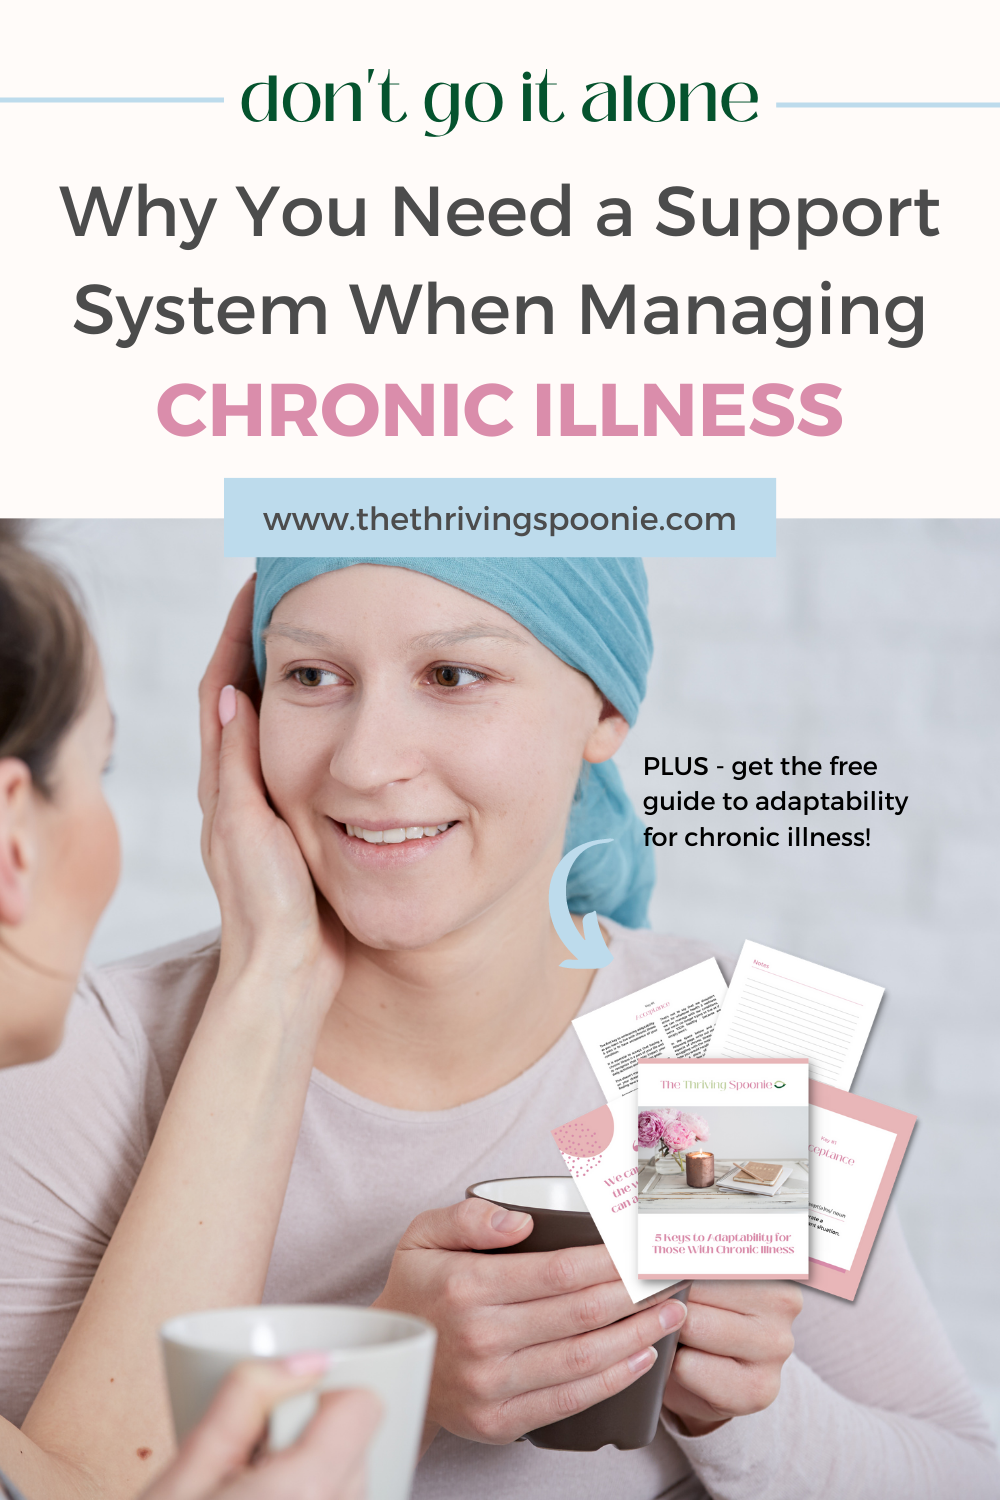 Managing chronic illness can be overwhelming. Don't go it alone. Get the support and resources you need to manage your condition. Learn why having a support system is key to your wellbeing and peace of mind.